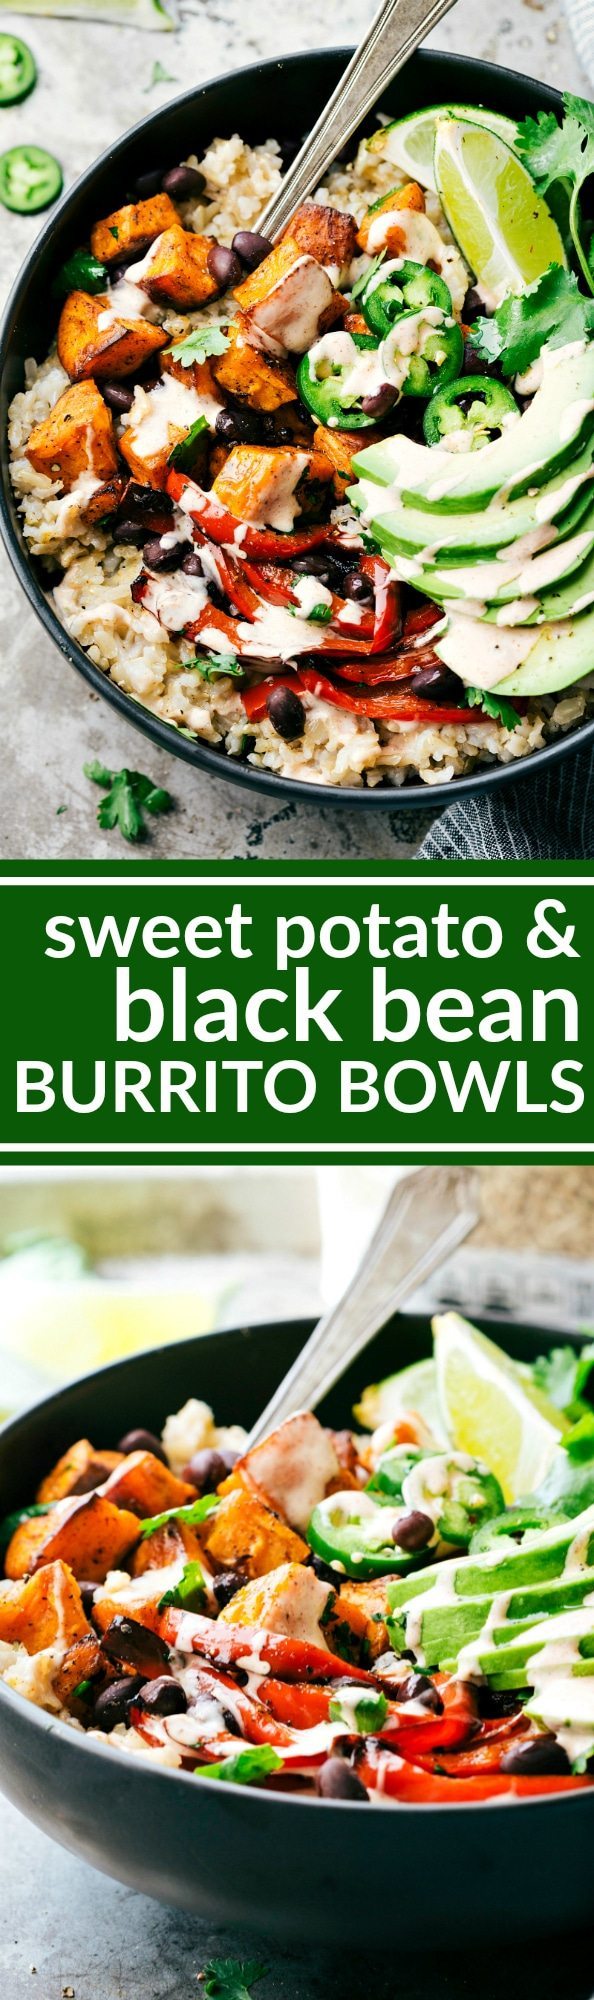 SWEET POTATO BURRITO BOWLS! A delicious and simple to make veggie black bean burrito bowls -- brown rice, seasoned & roasted sweet potatoes + bell peppers, black beans, and avocado with the most incredible chipotle lime sauce. via chelseasmessyapron.com